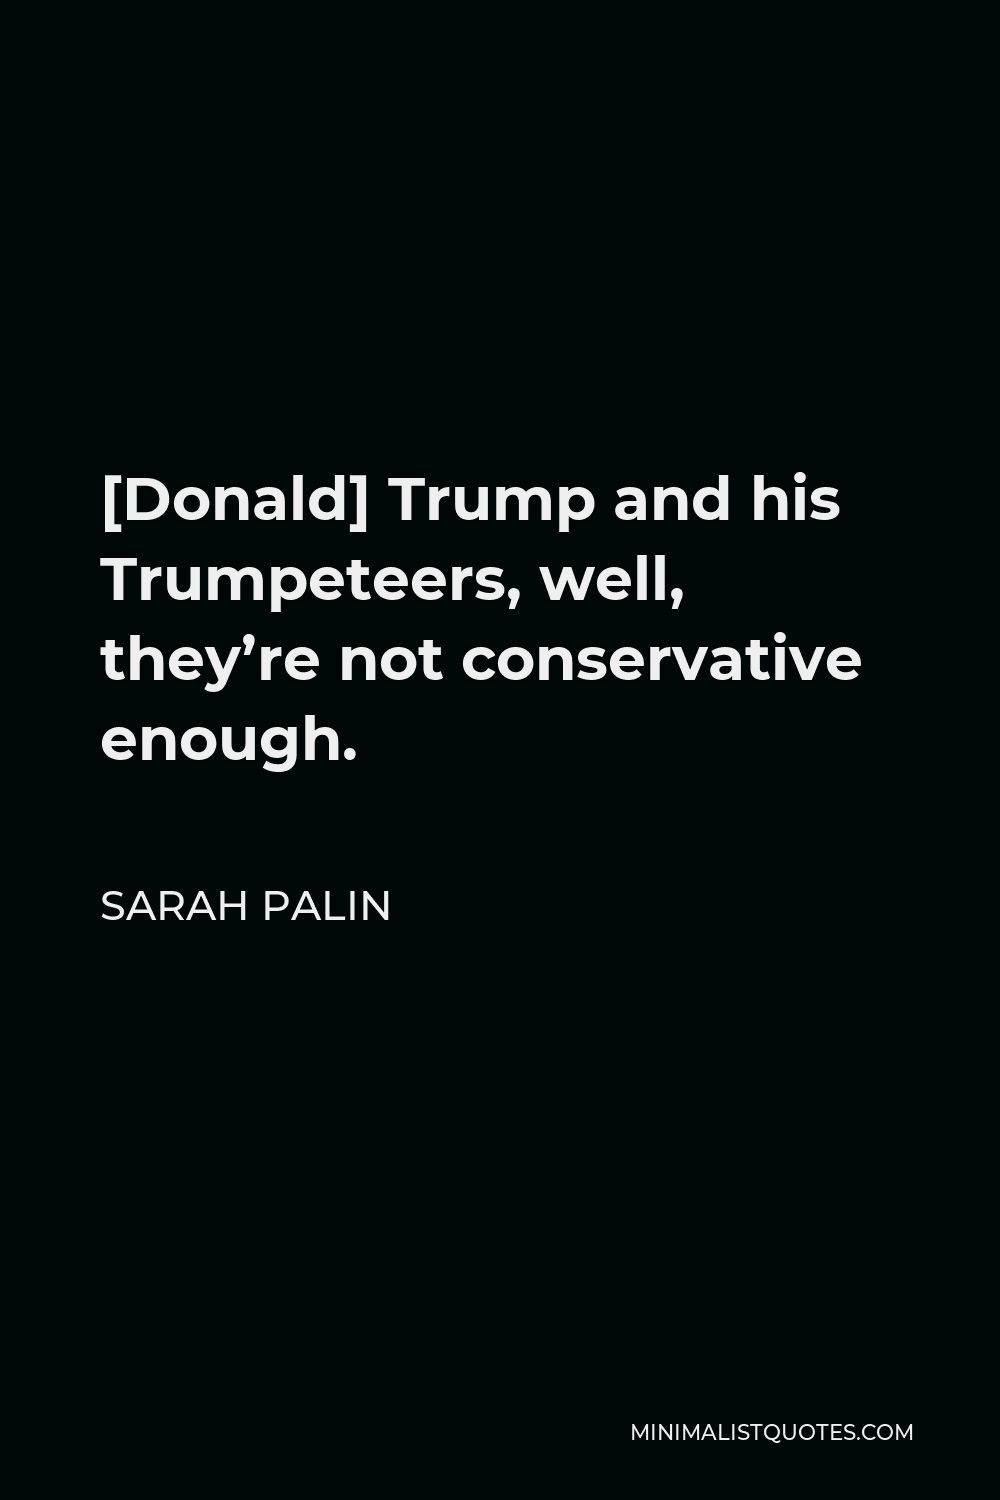 Sarah Palin Quote - [Donald] Trump and his Trumpeteers, well, they’re not conservative enough.